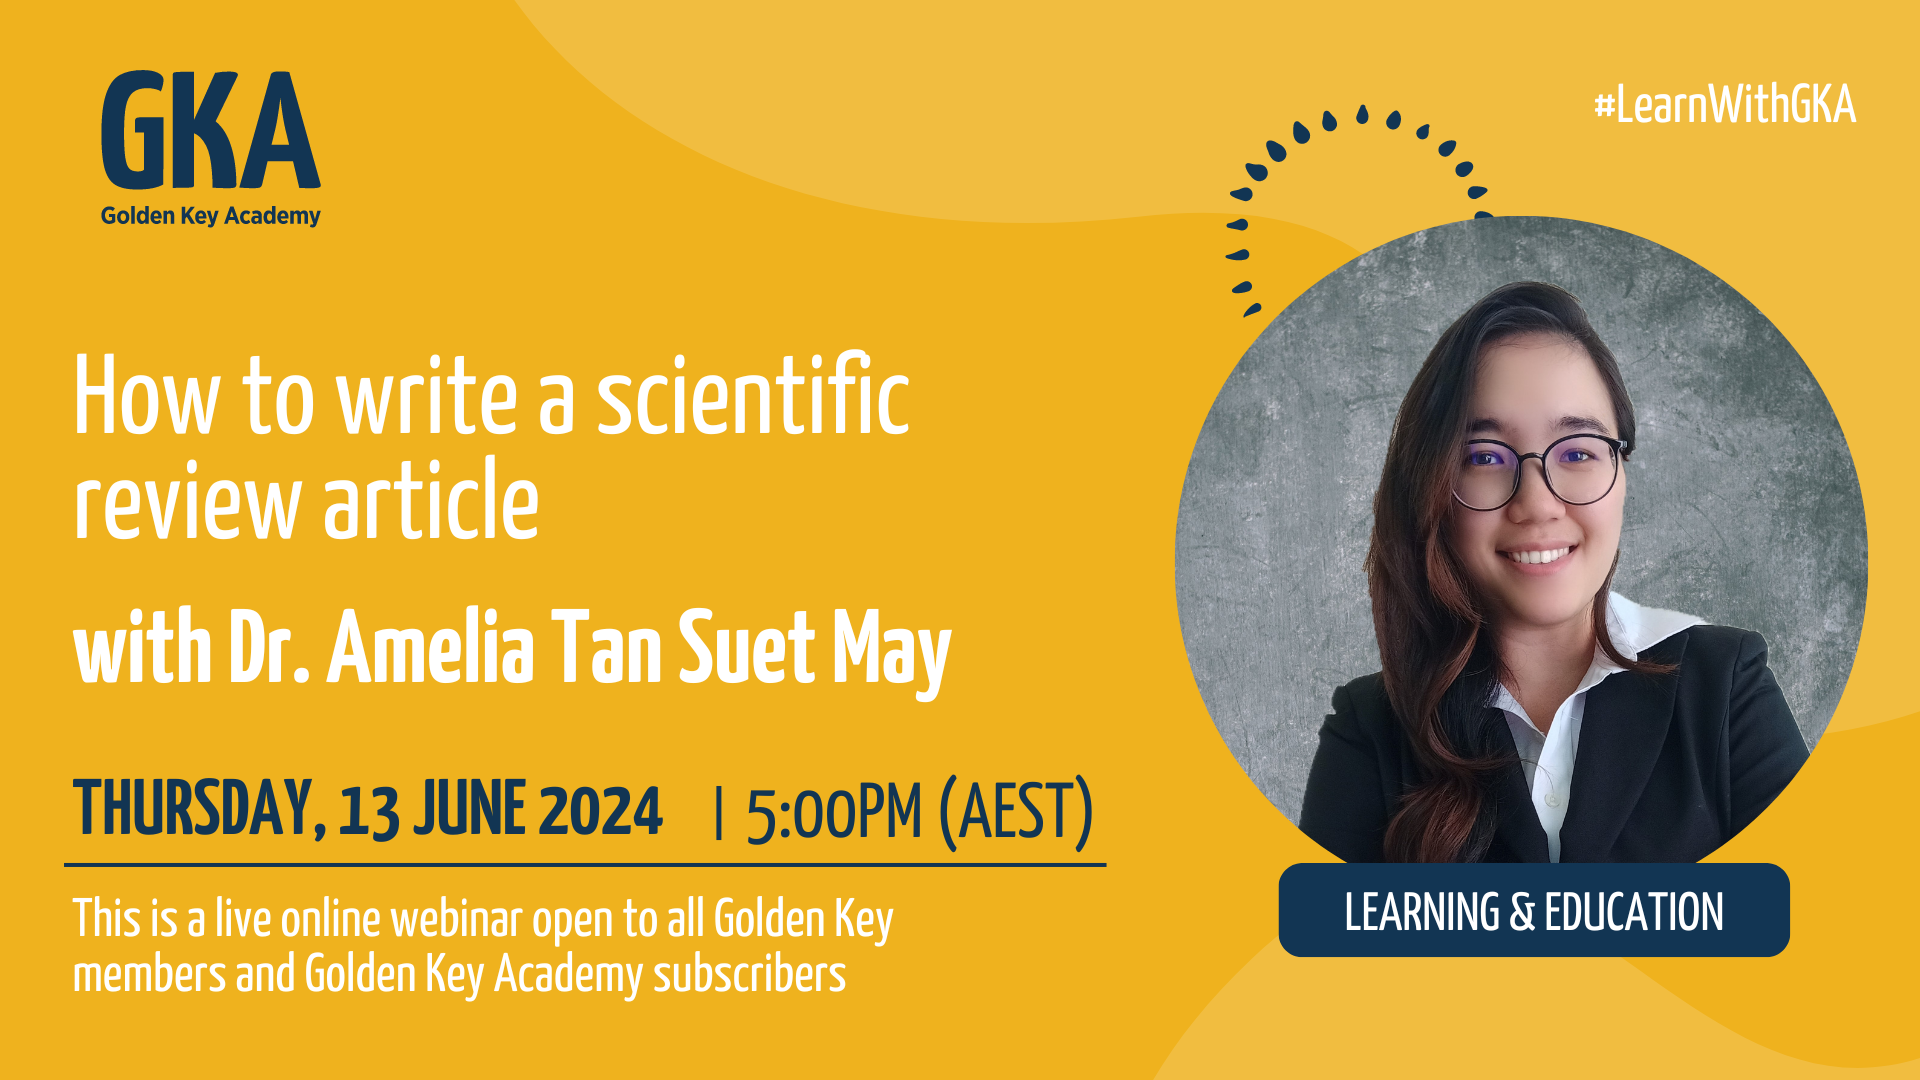 How to write a scientific review article with Dr. Amelia Tan Suet May